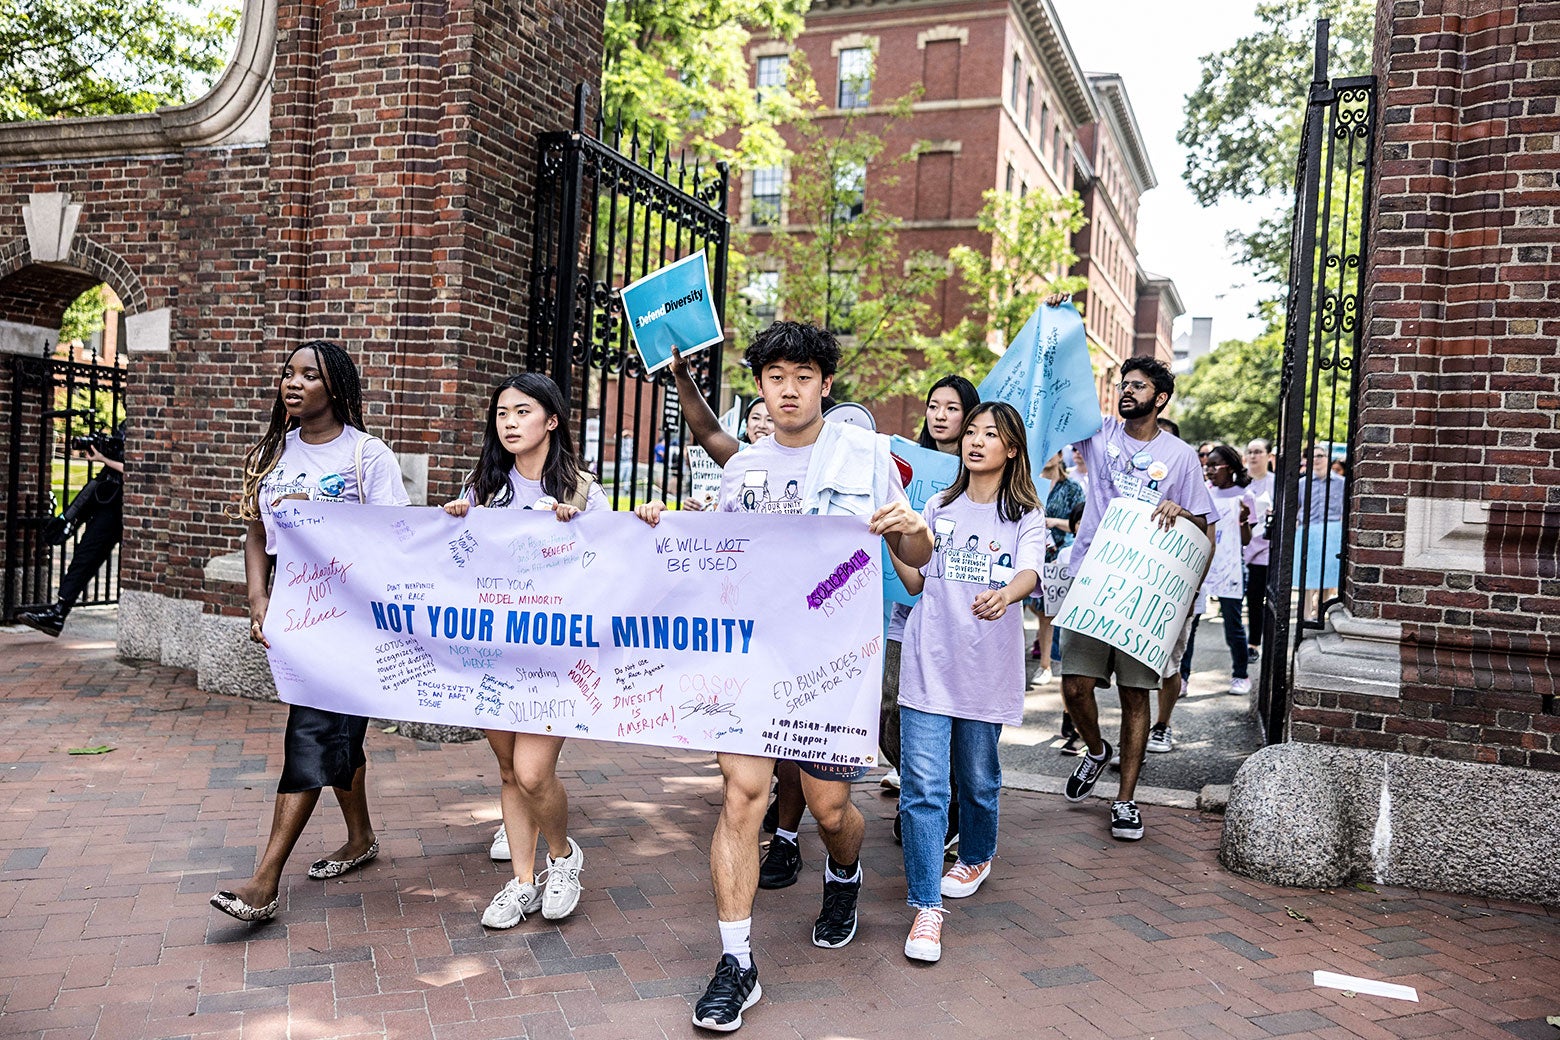 Students and others march through Harvard University while holding up a banner in support of affirmative action.